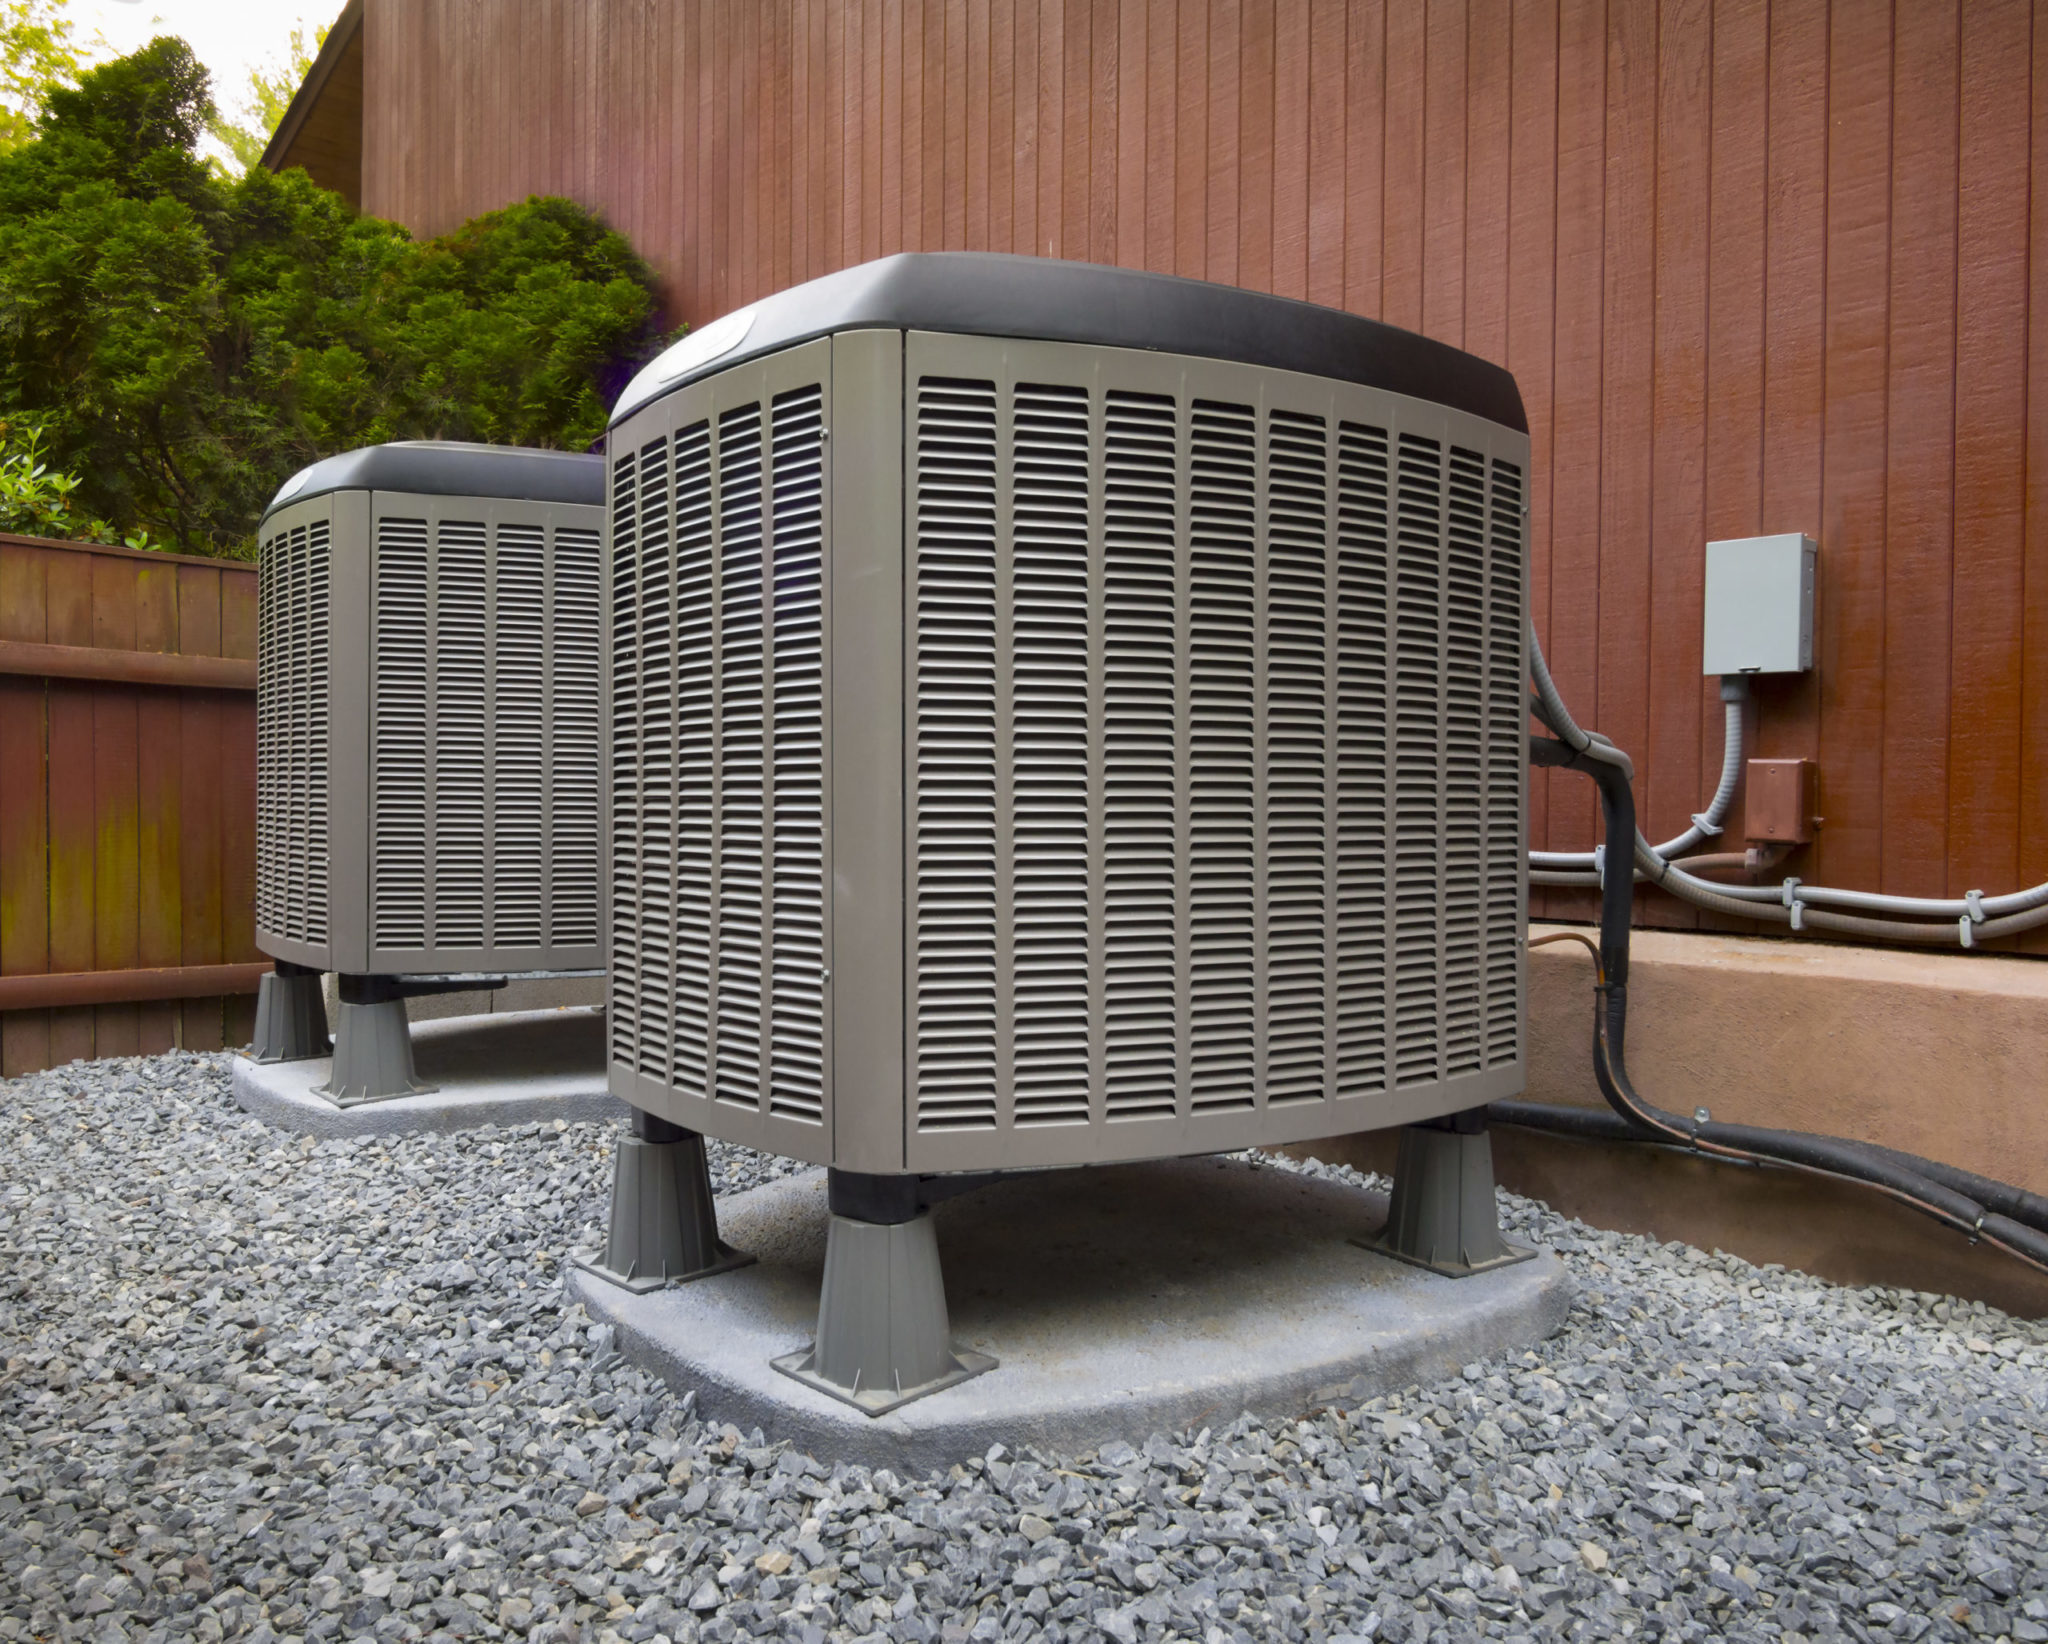 WHAT IS A HEAT PUMP?